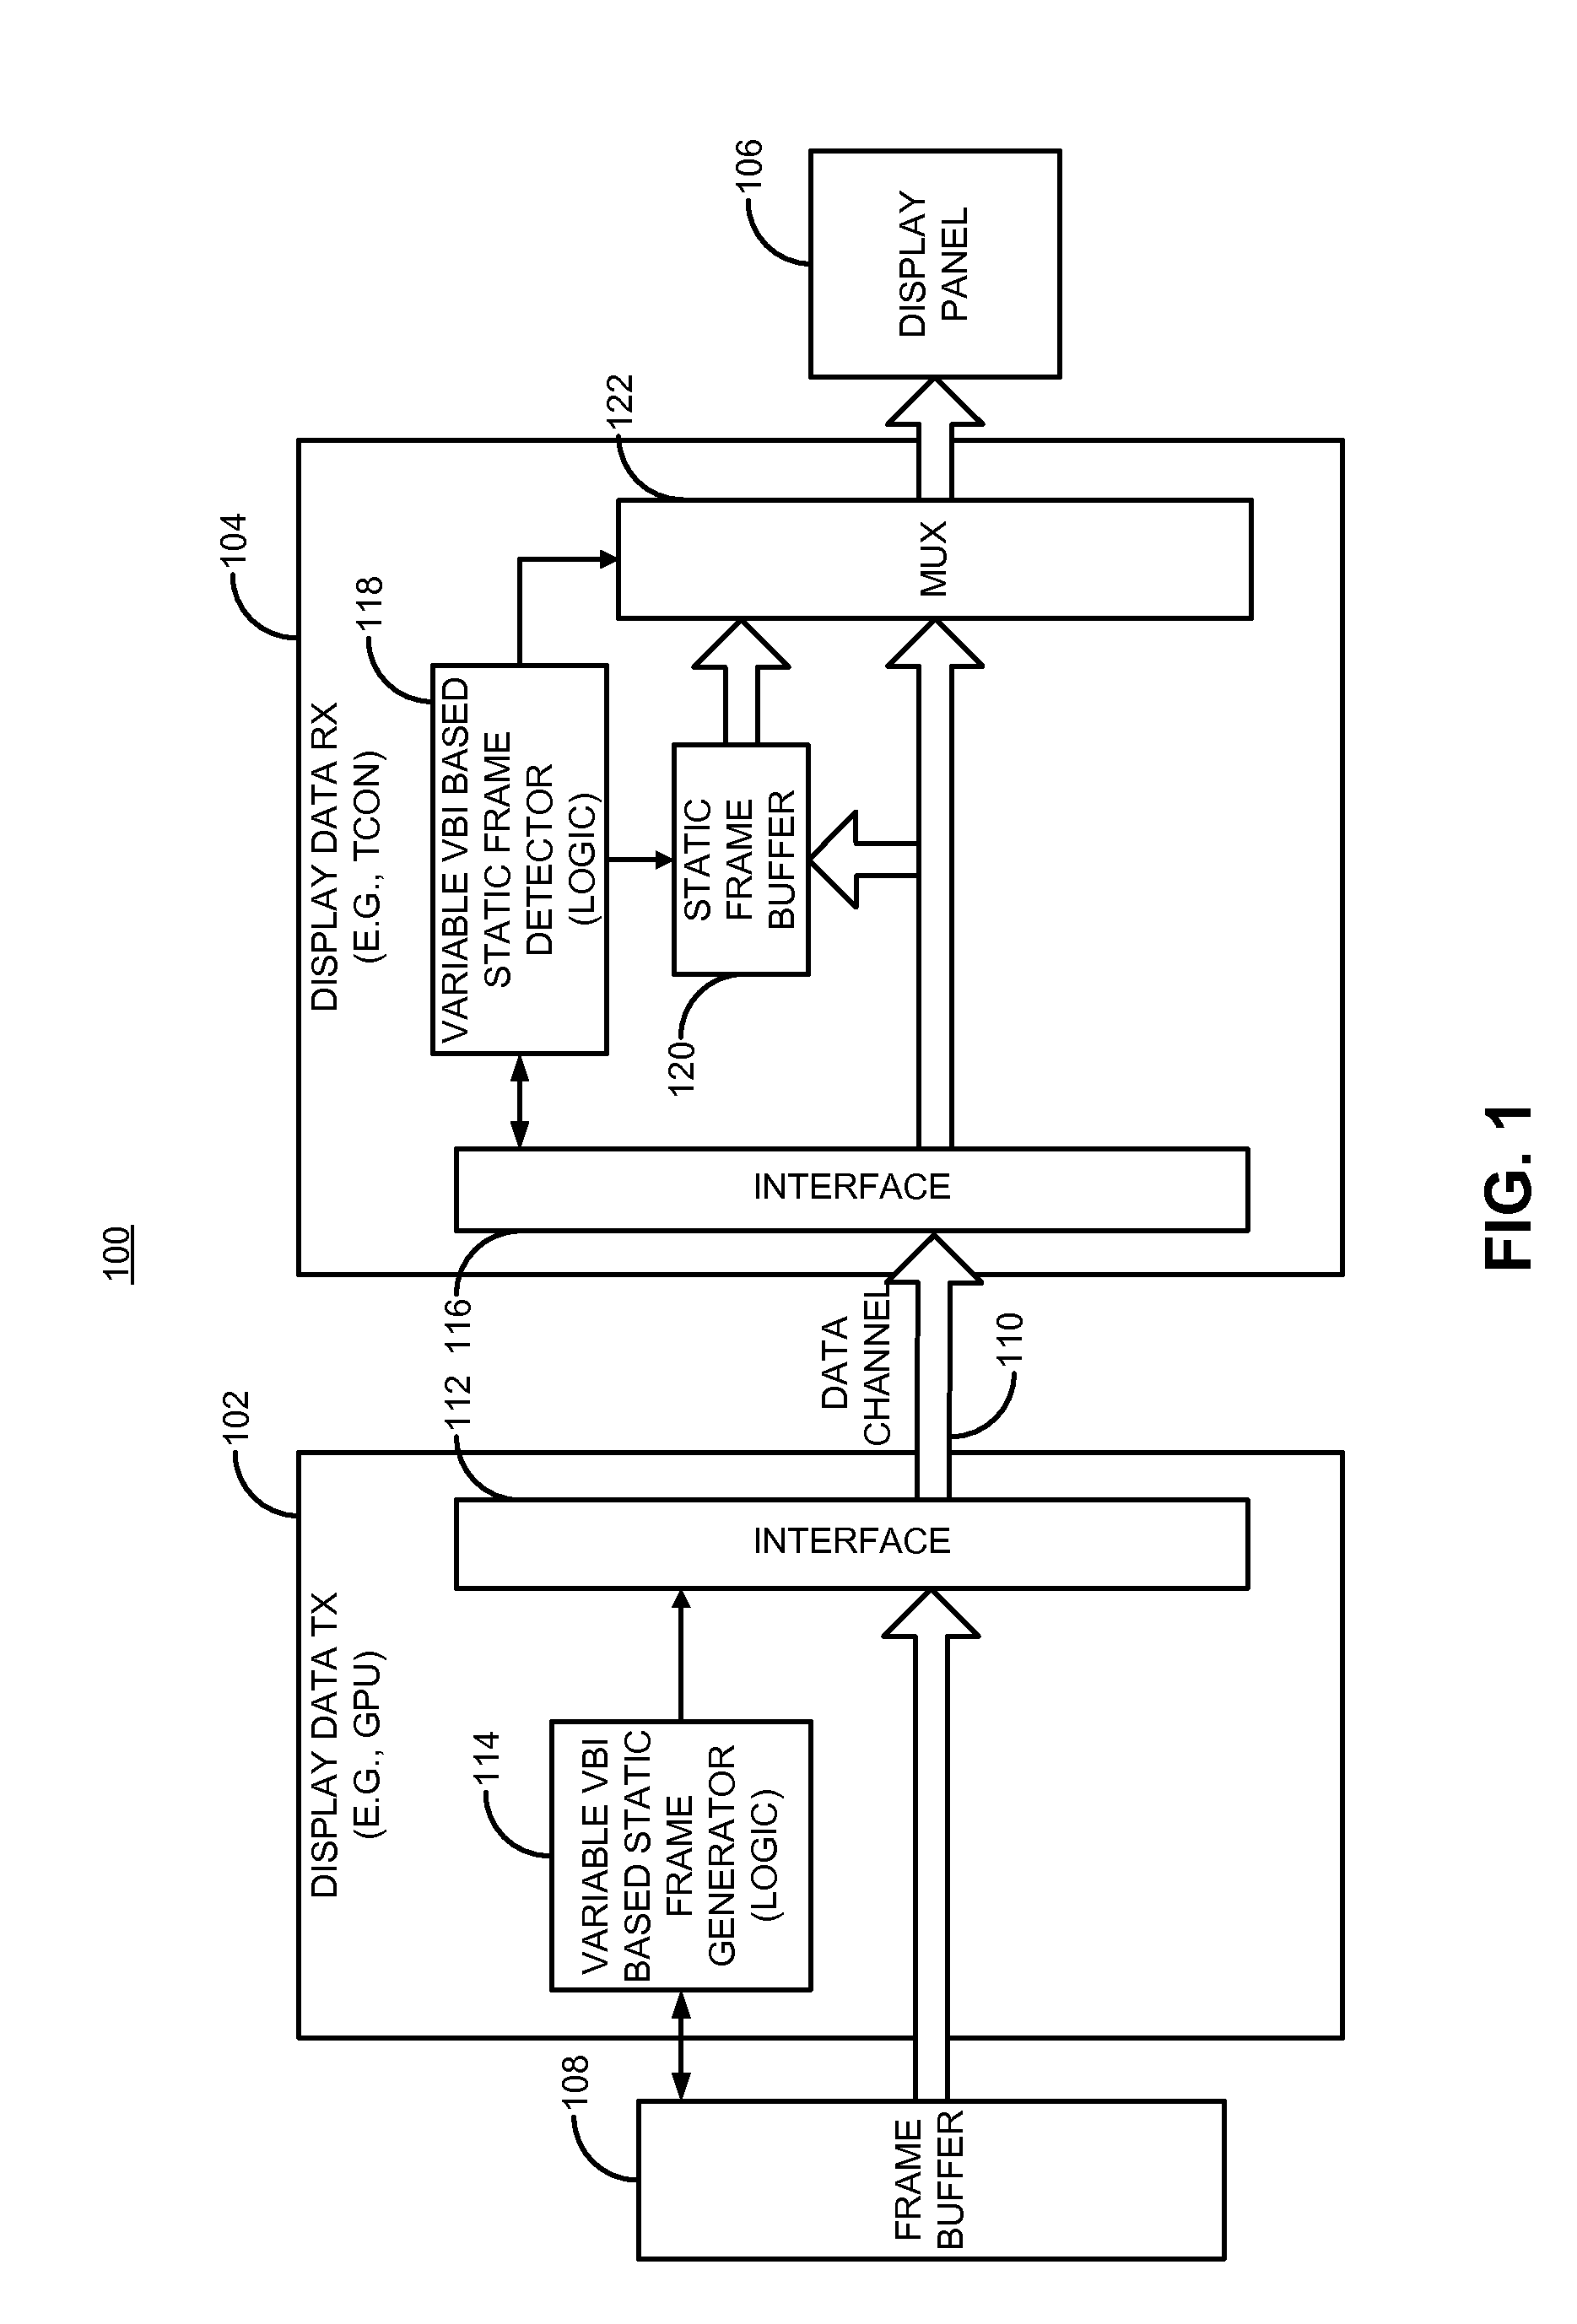 Method and apparatus for providing indication of a static frame